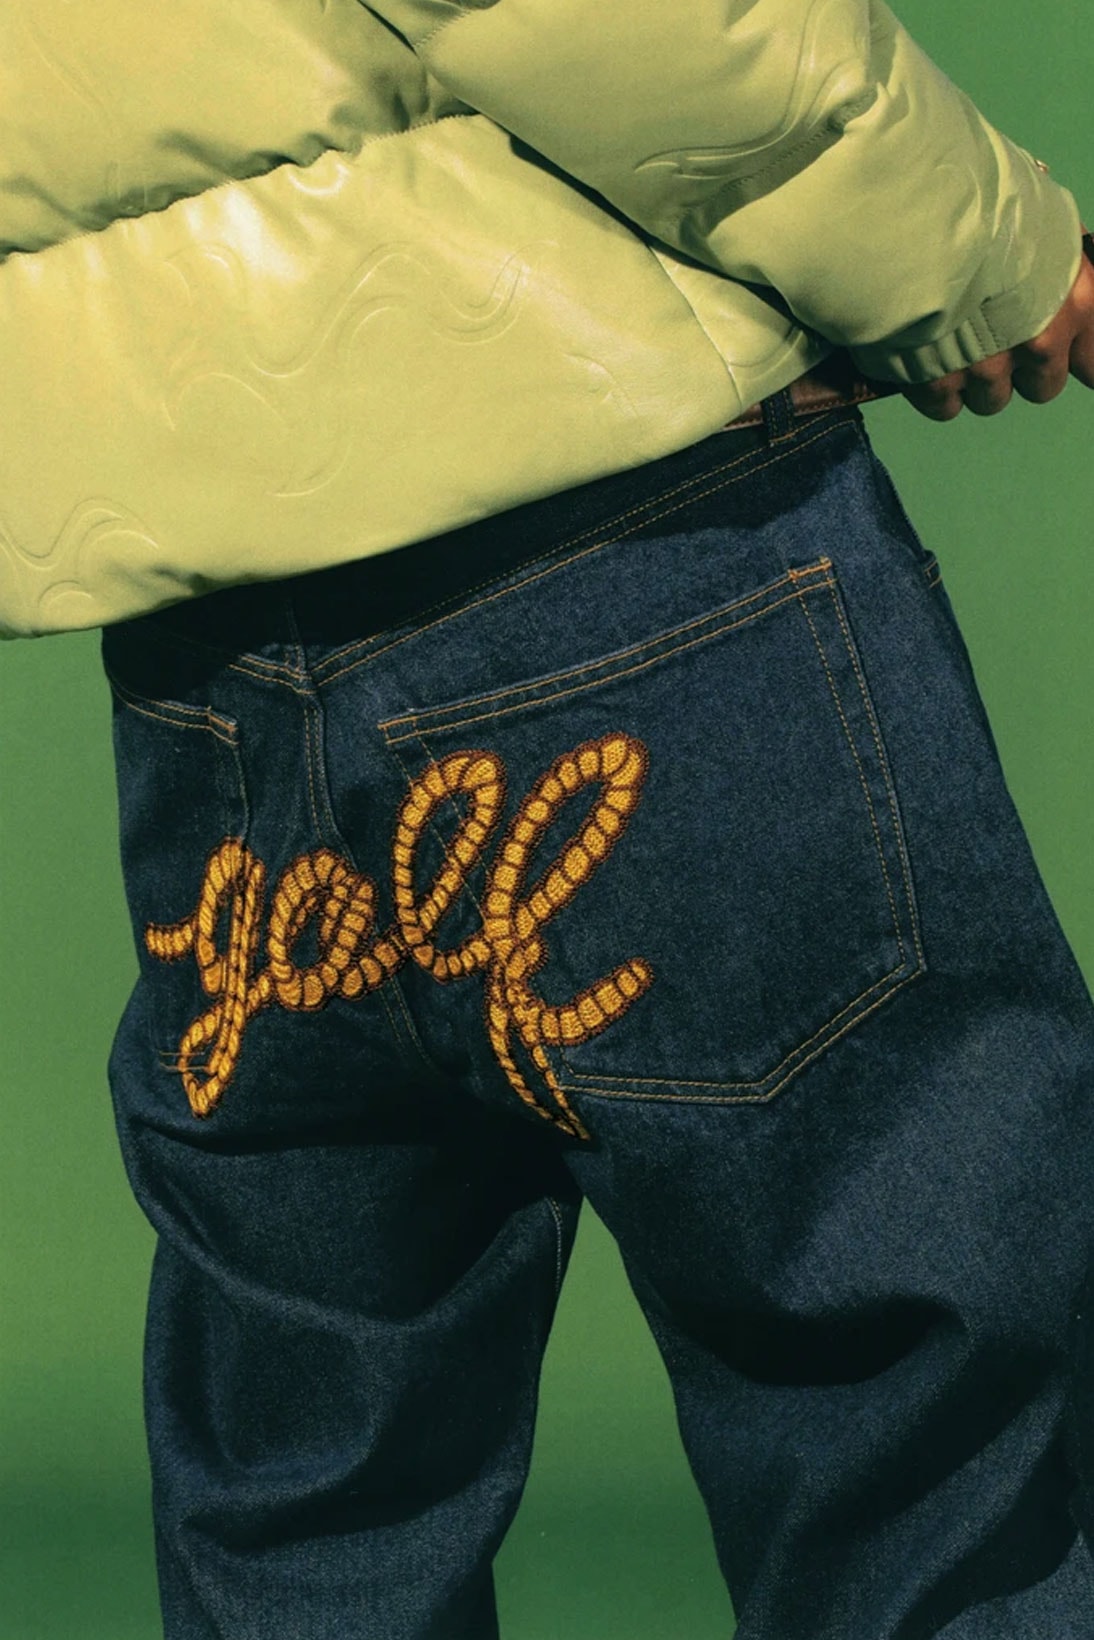 Golf Wang Tyler The Creator Winter Lookbook Collection Puffer Jacket Jeans